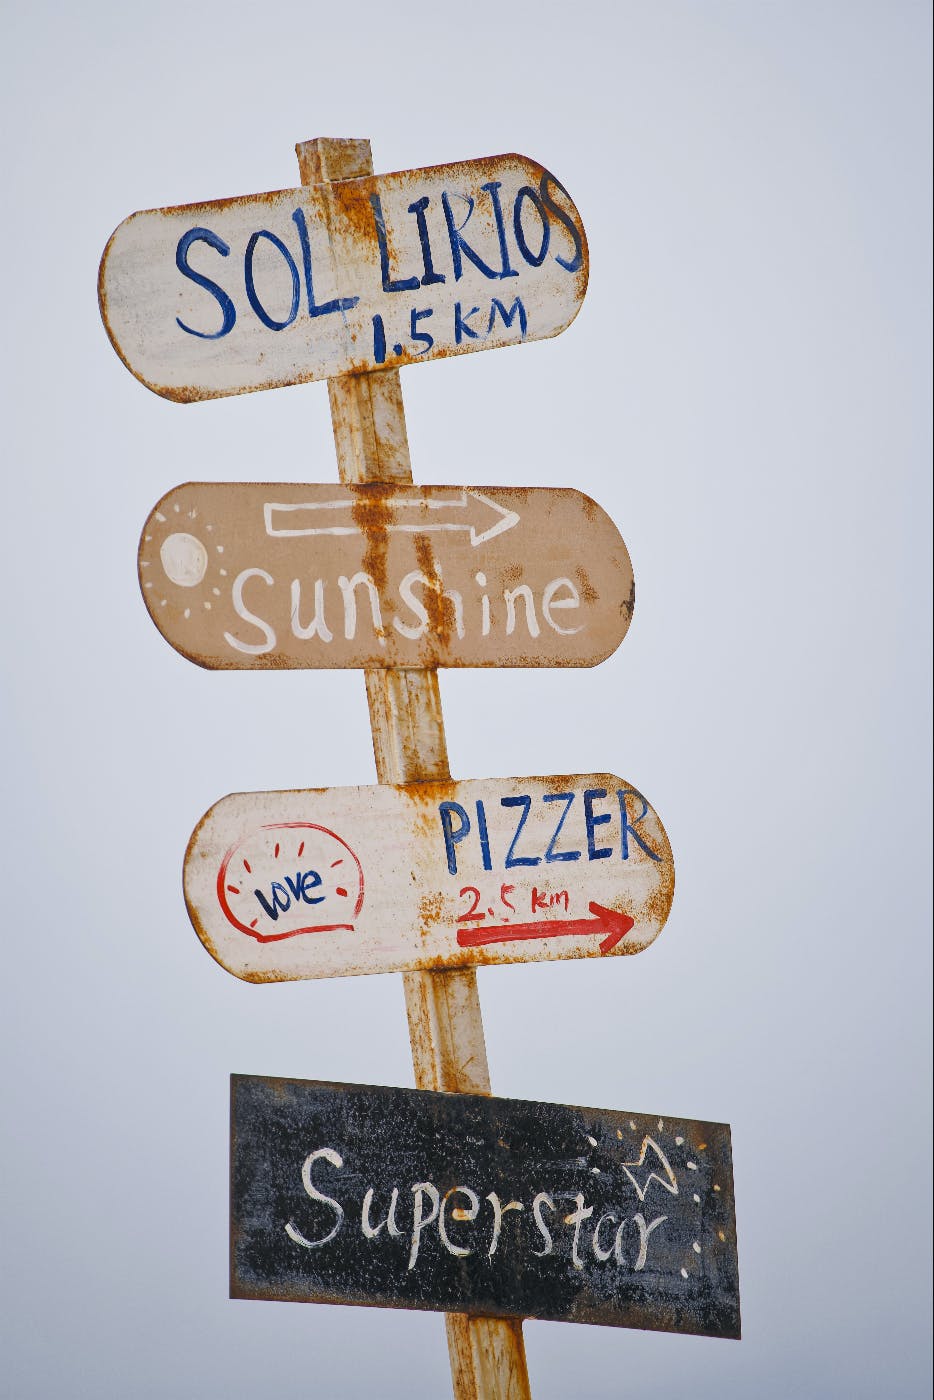 A sign on a pole with many destinations